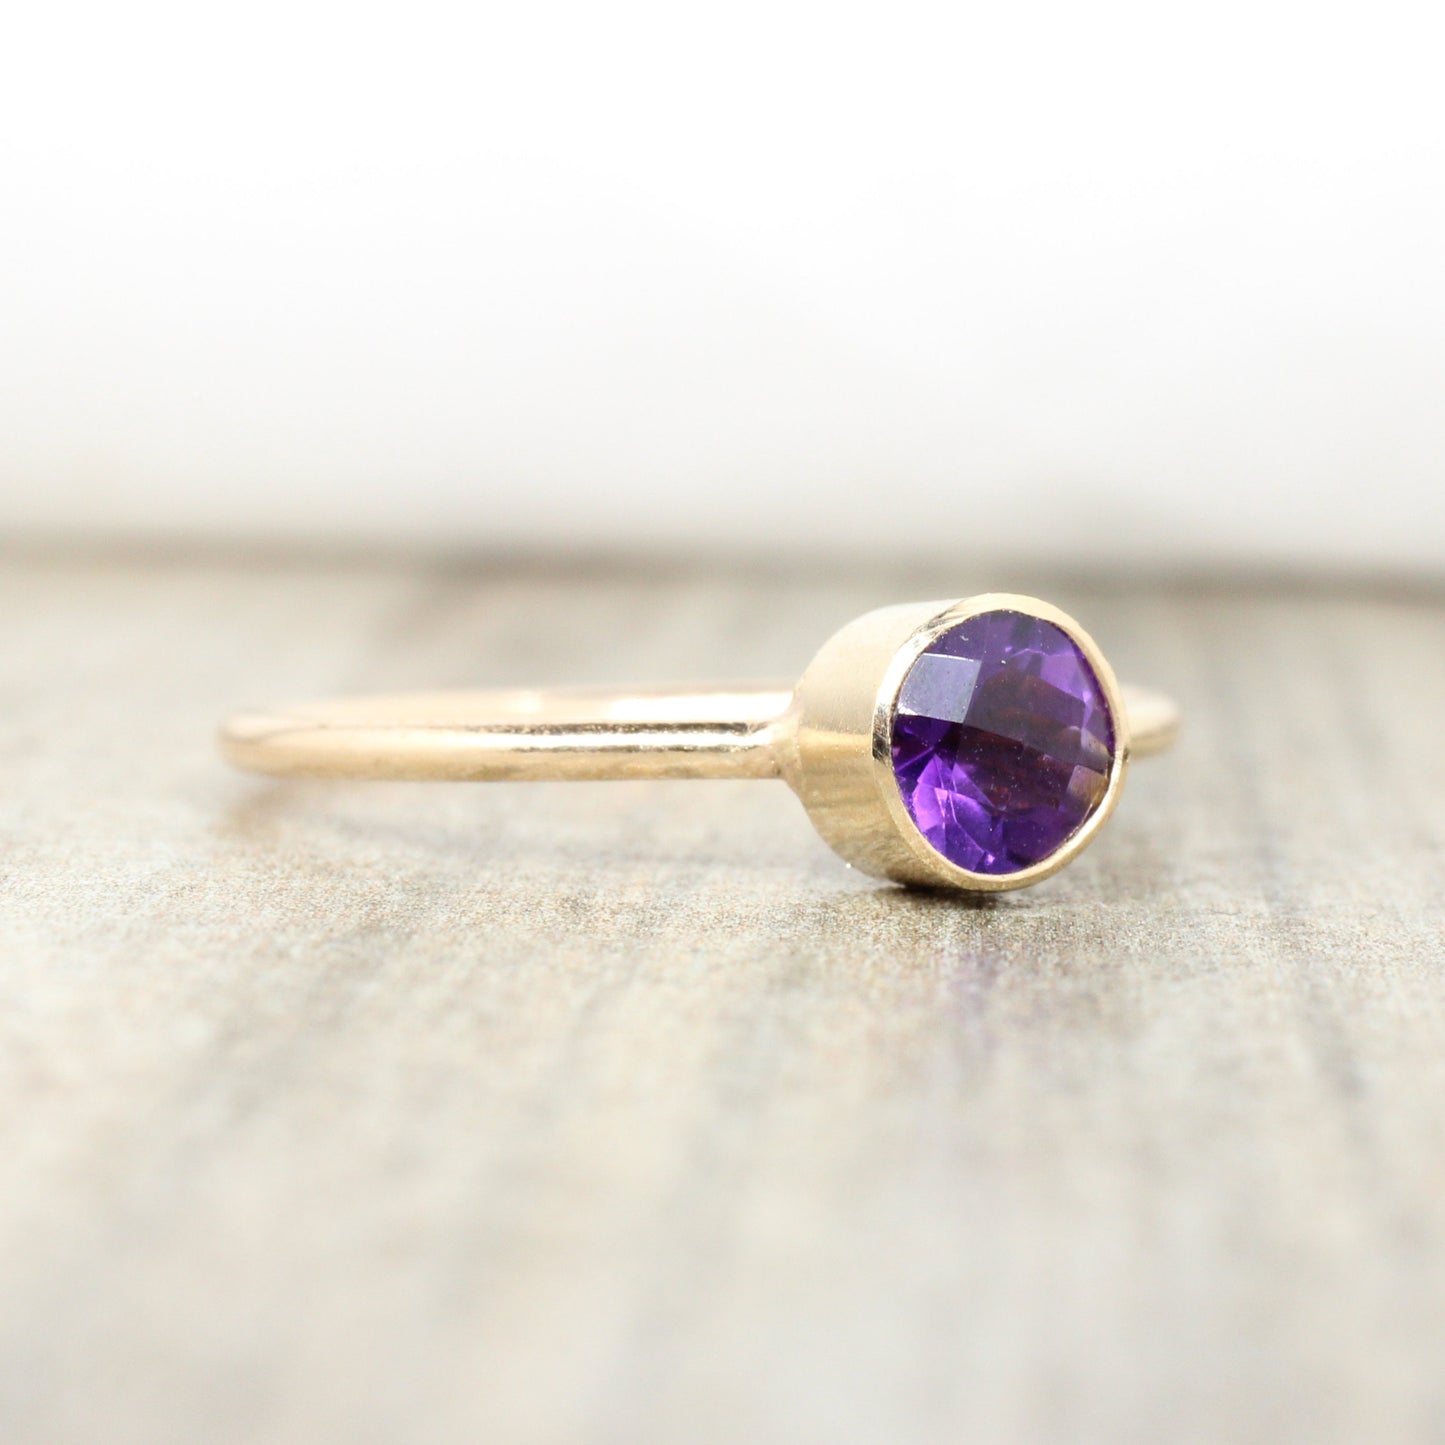 14K Gold Filled Genuine Amethyst Ring // 5mm Faceted February Birthstone